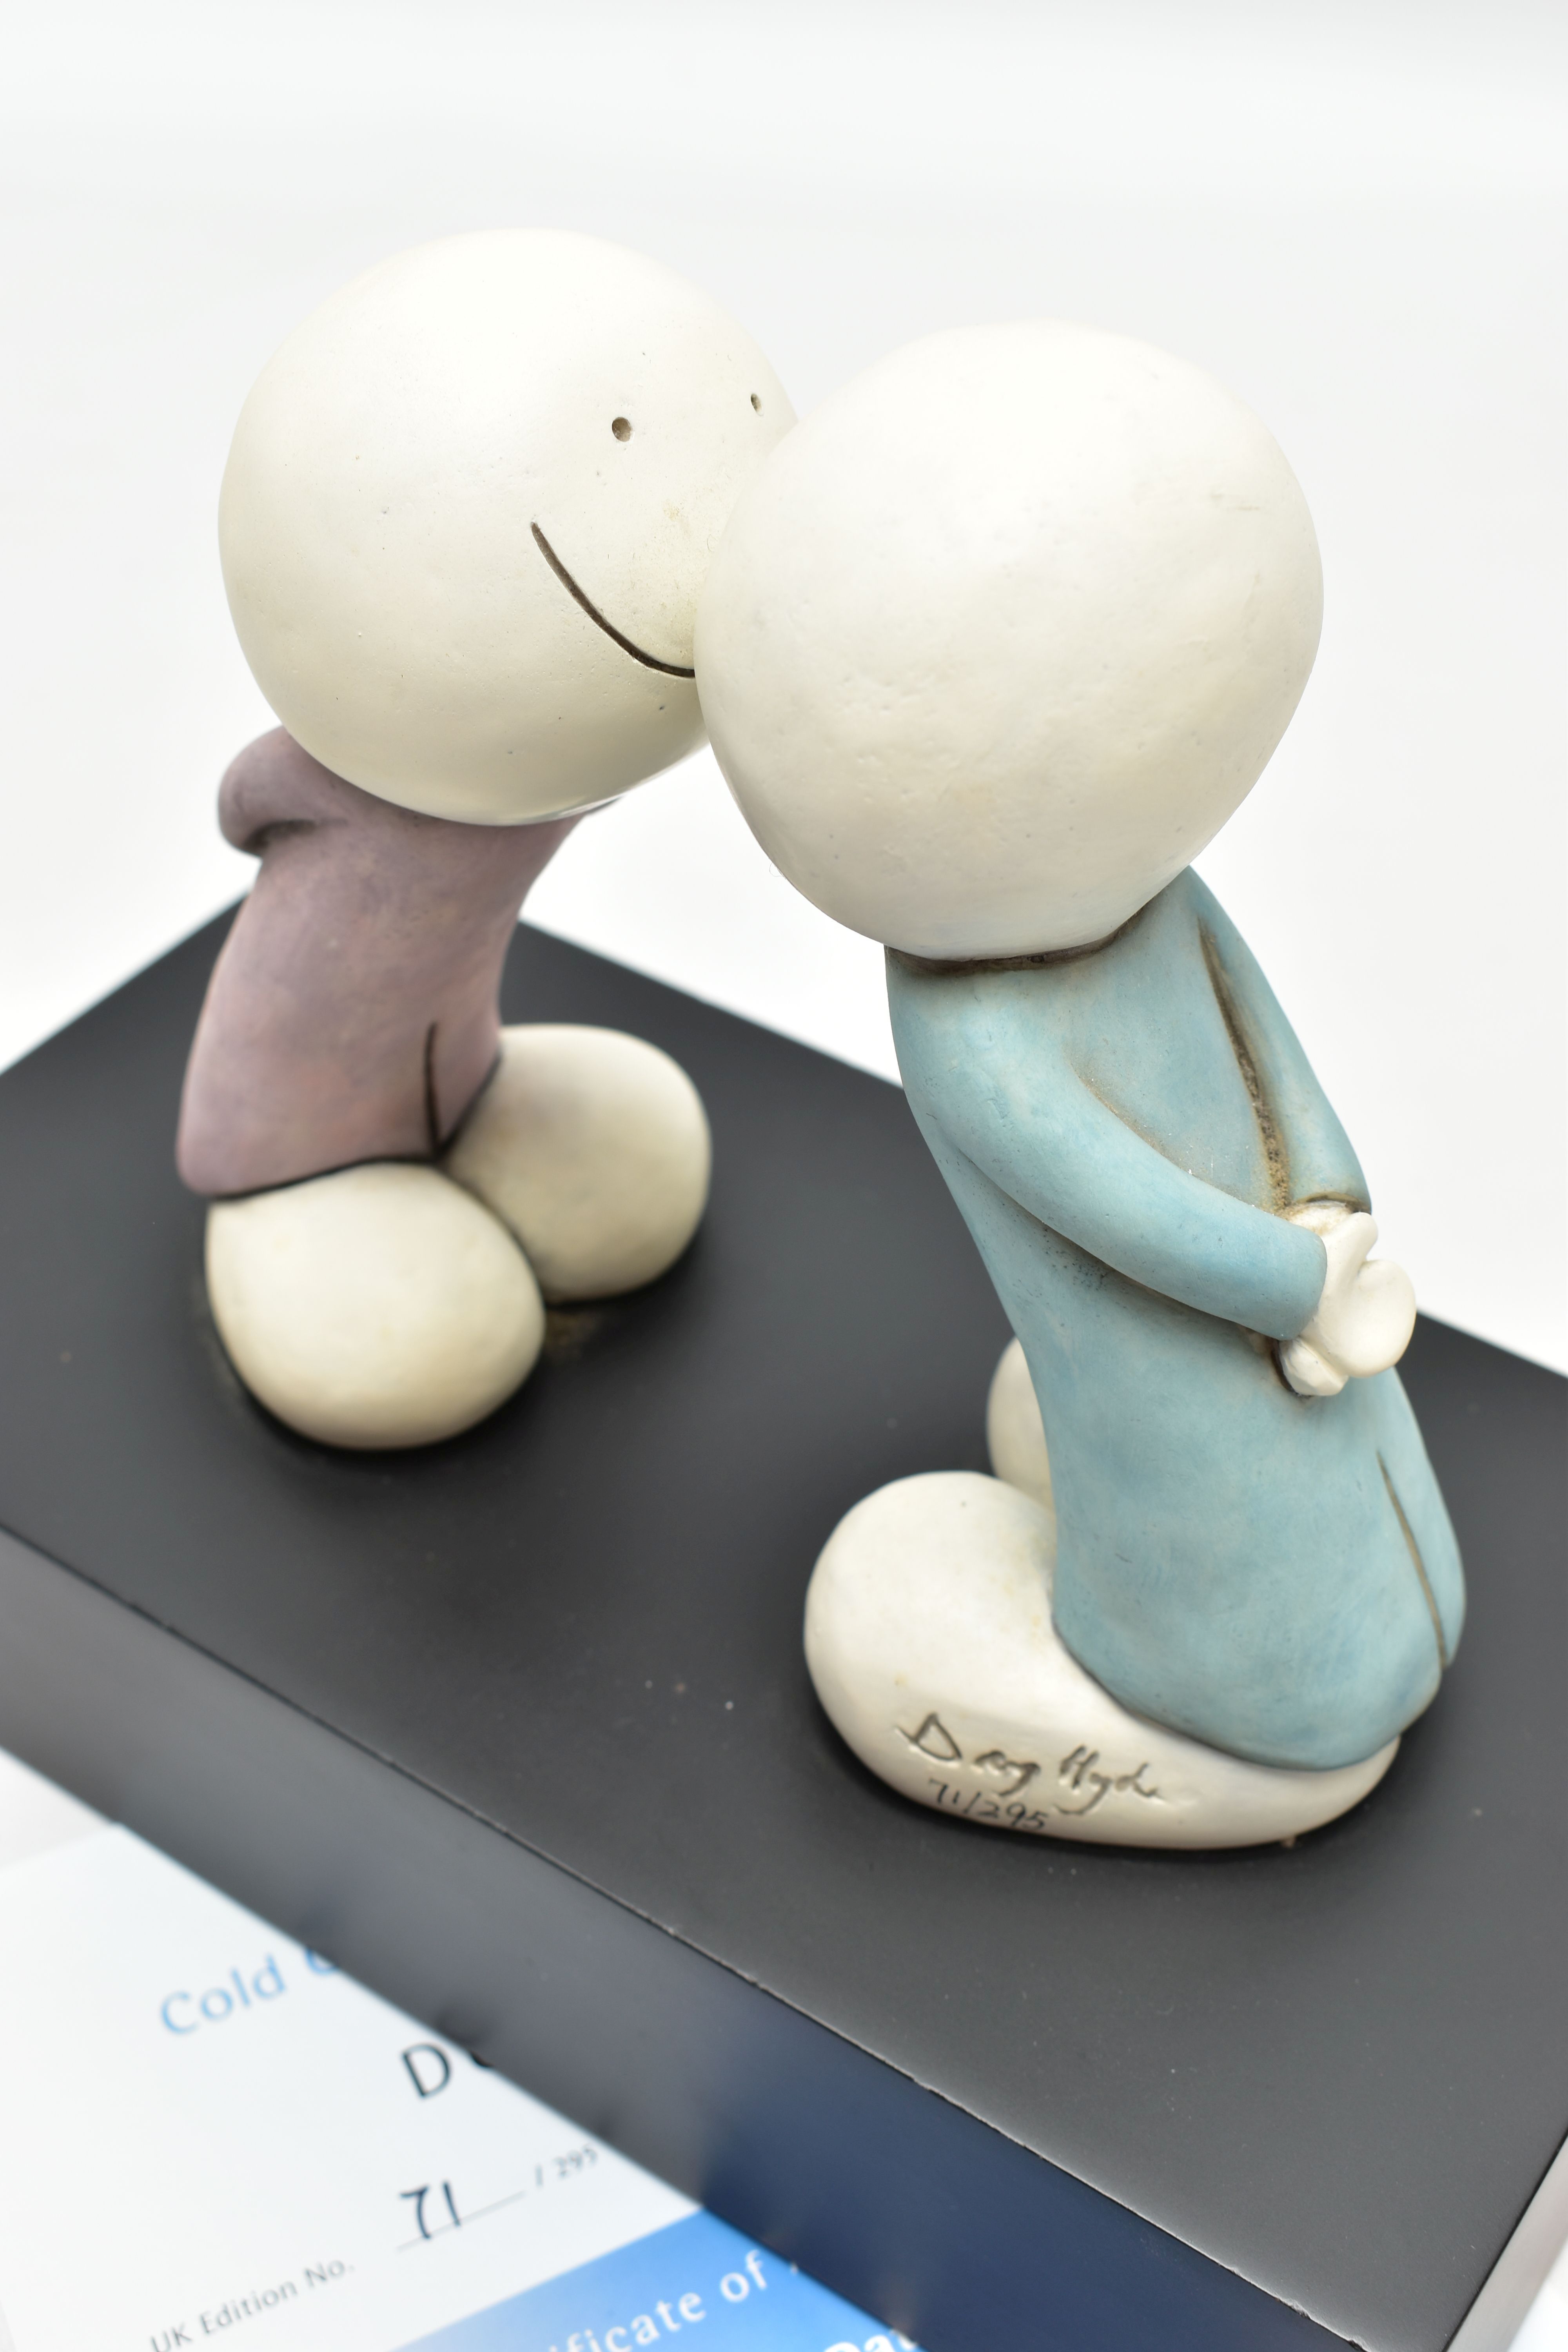 DOUG HYDE (BRITISH 1972) 'FIRST DATE', a limited edition sculpture depicting two figures leaning - Image 5 of 8